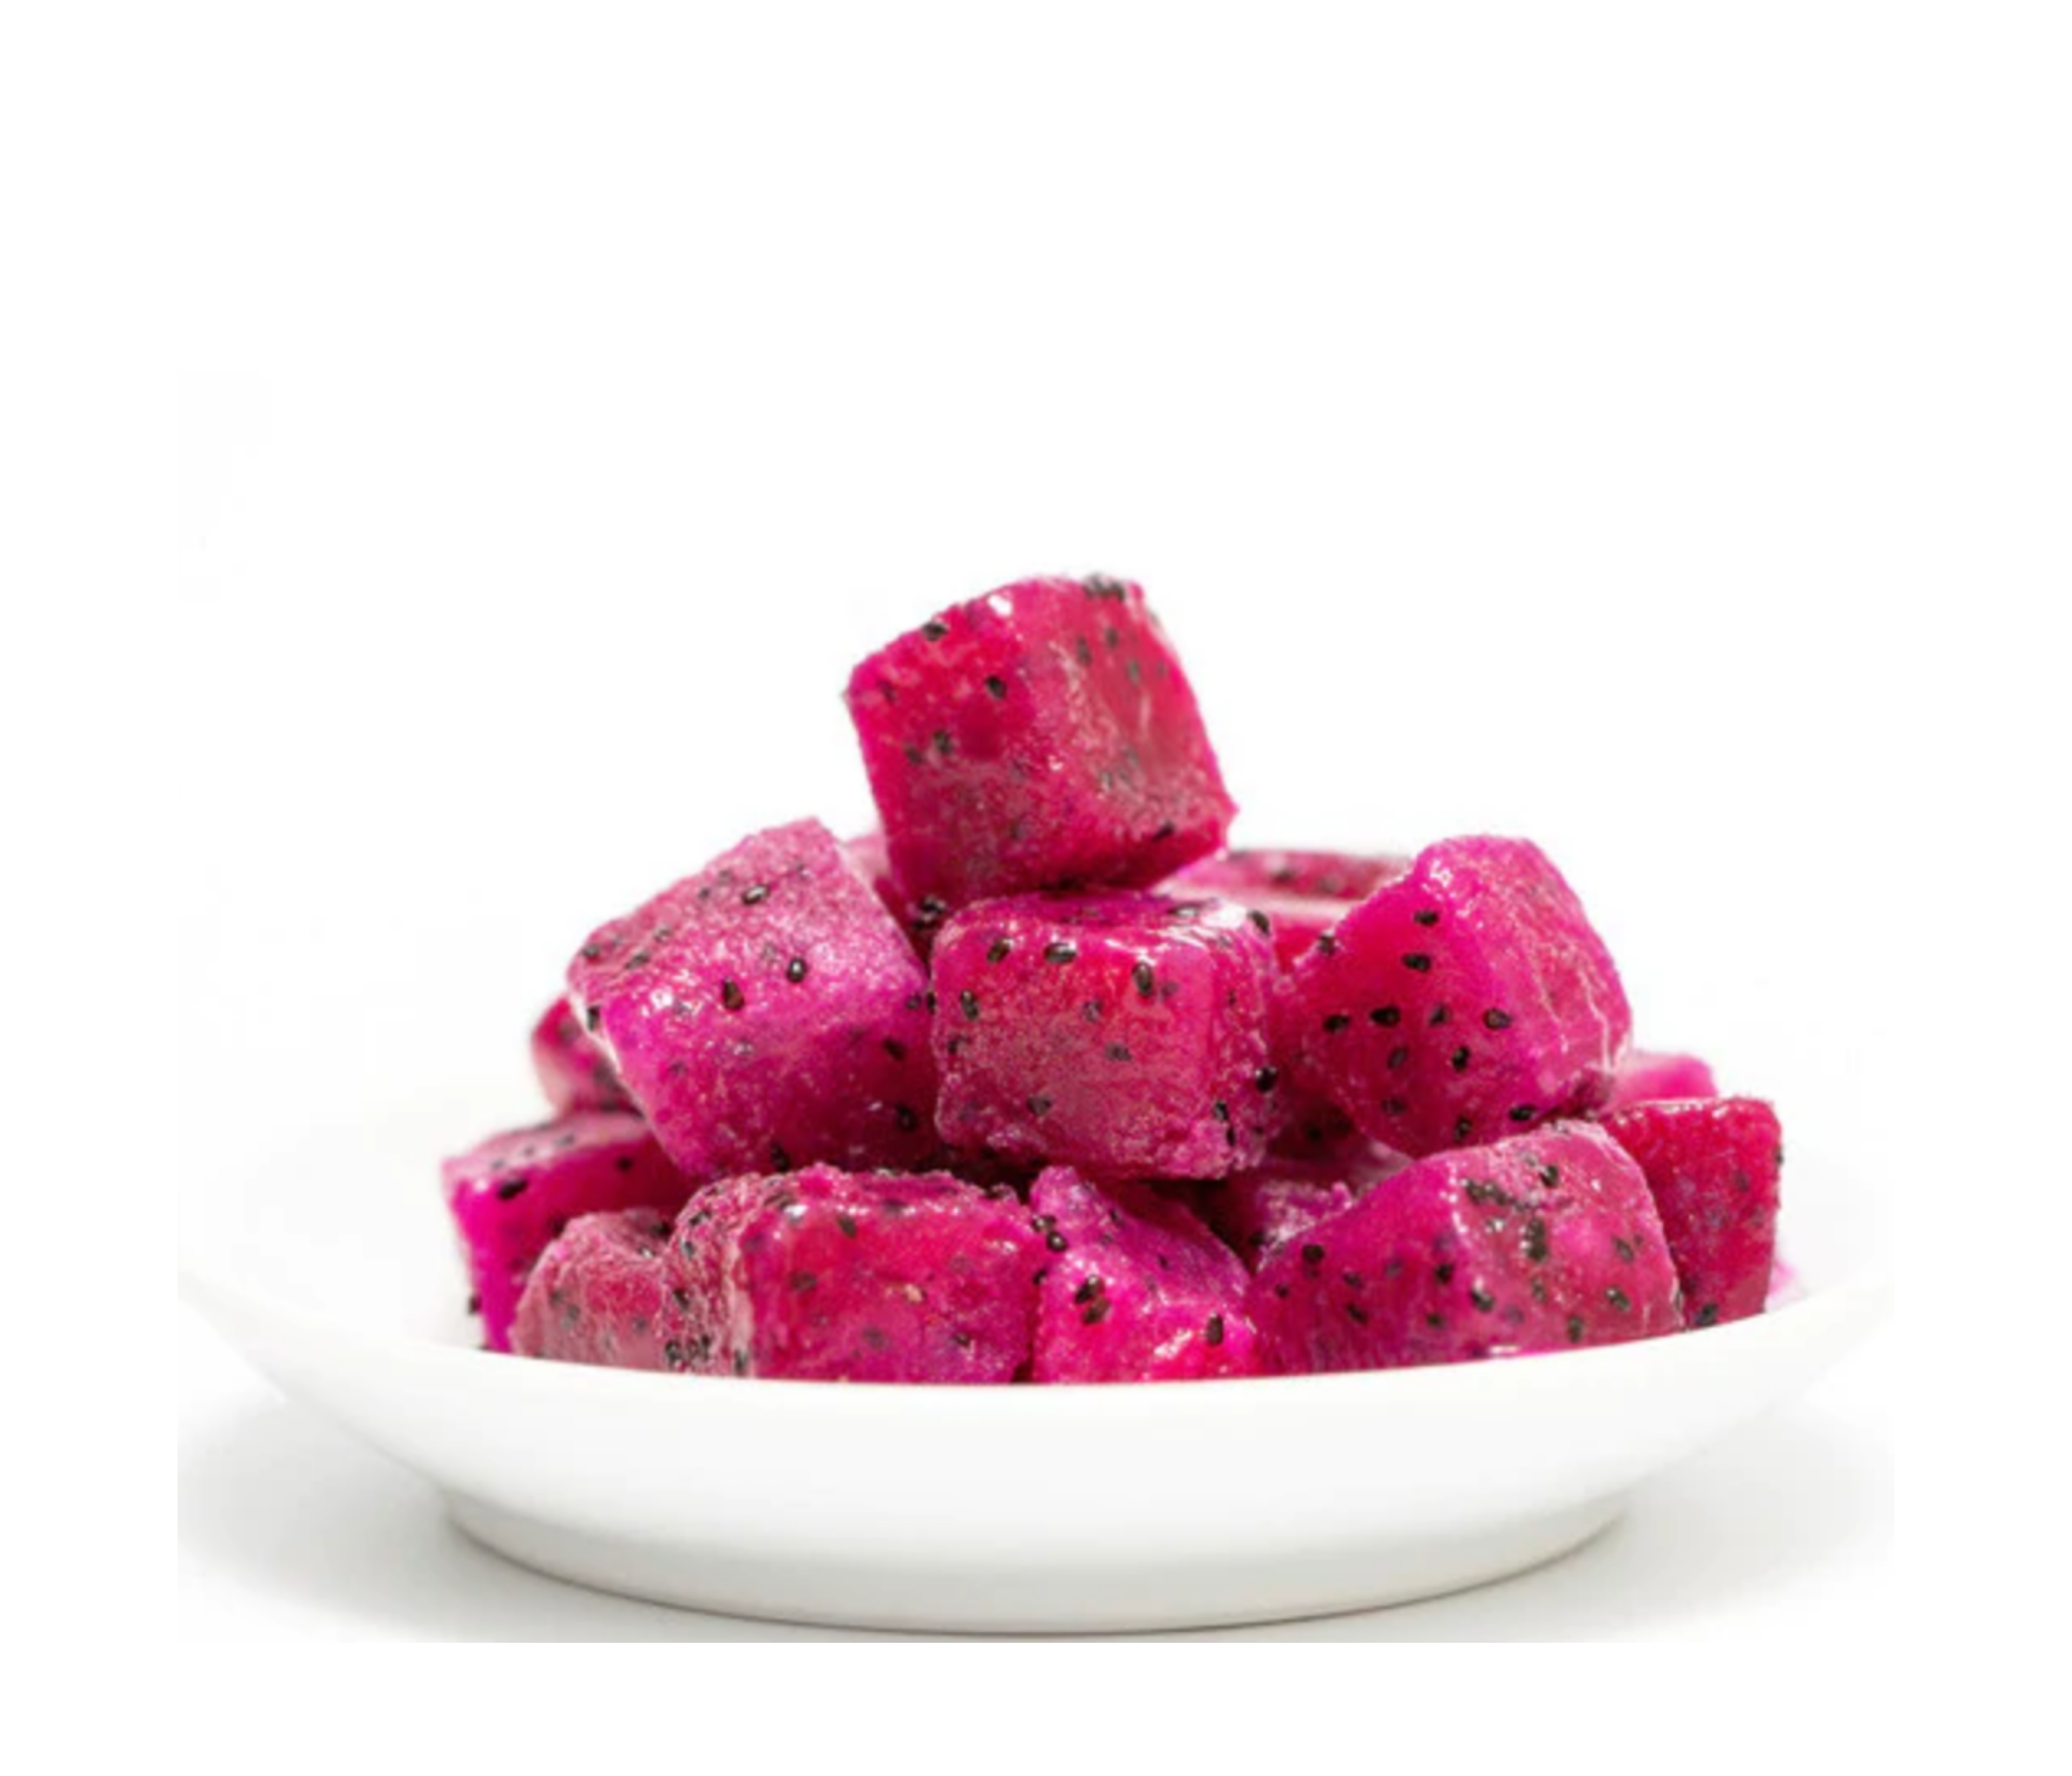 IQF DRAGON FRUIT DICE FROM VIETNAMESE MANUFACTURER - MOST COMPETITIVE PRICE AND HIGH QUALITY